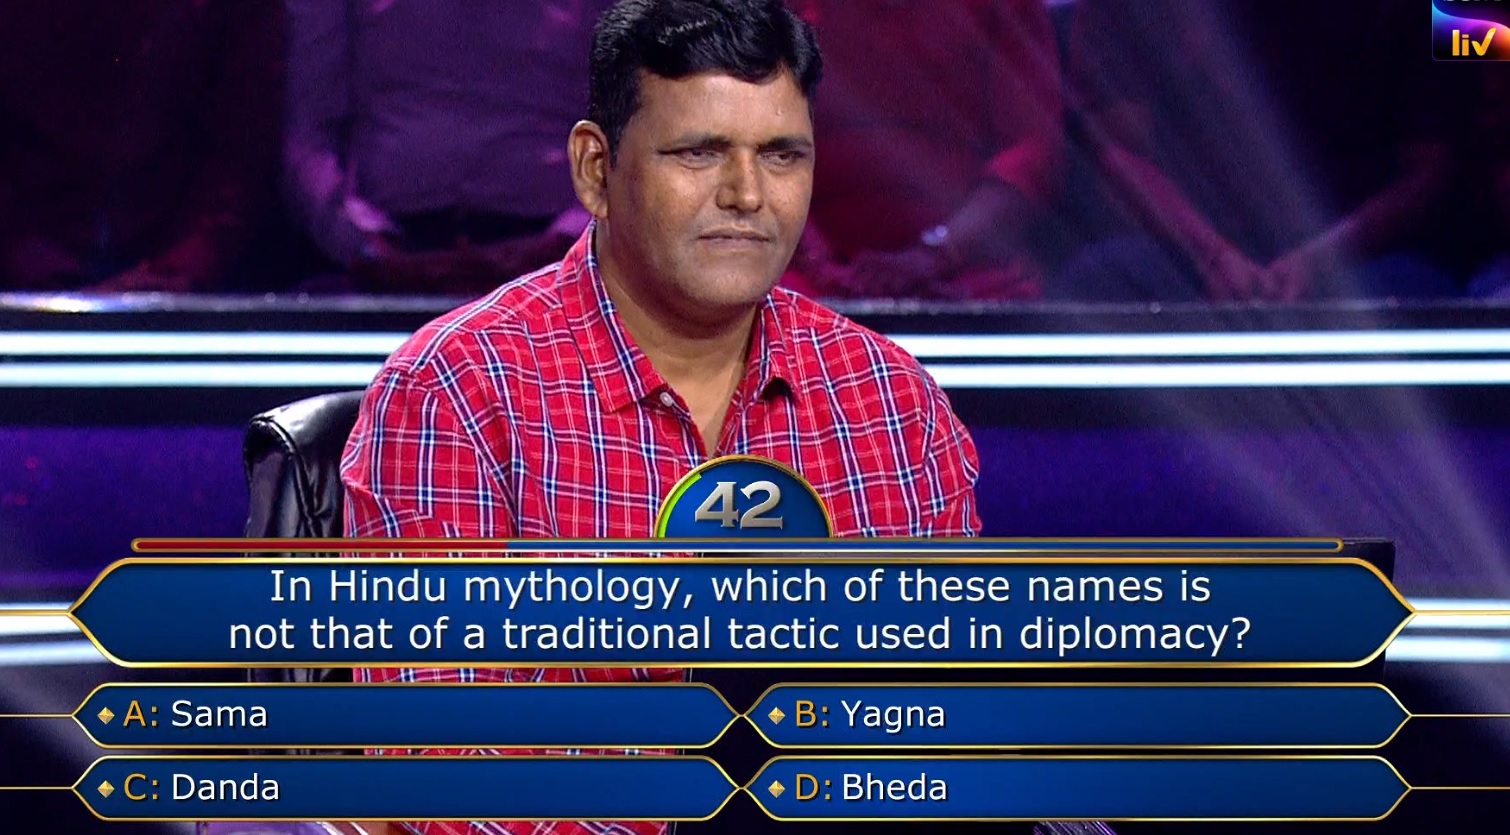 Ques : In Hindu mythology, which of these names is not that of a traditional tactic used in diplomacy?